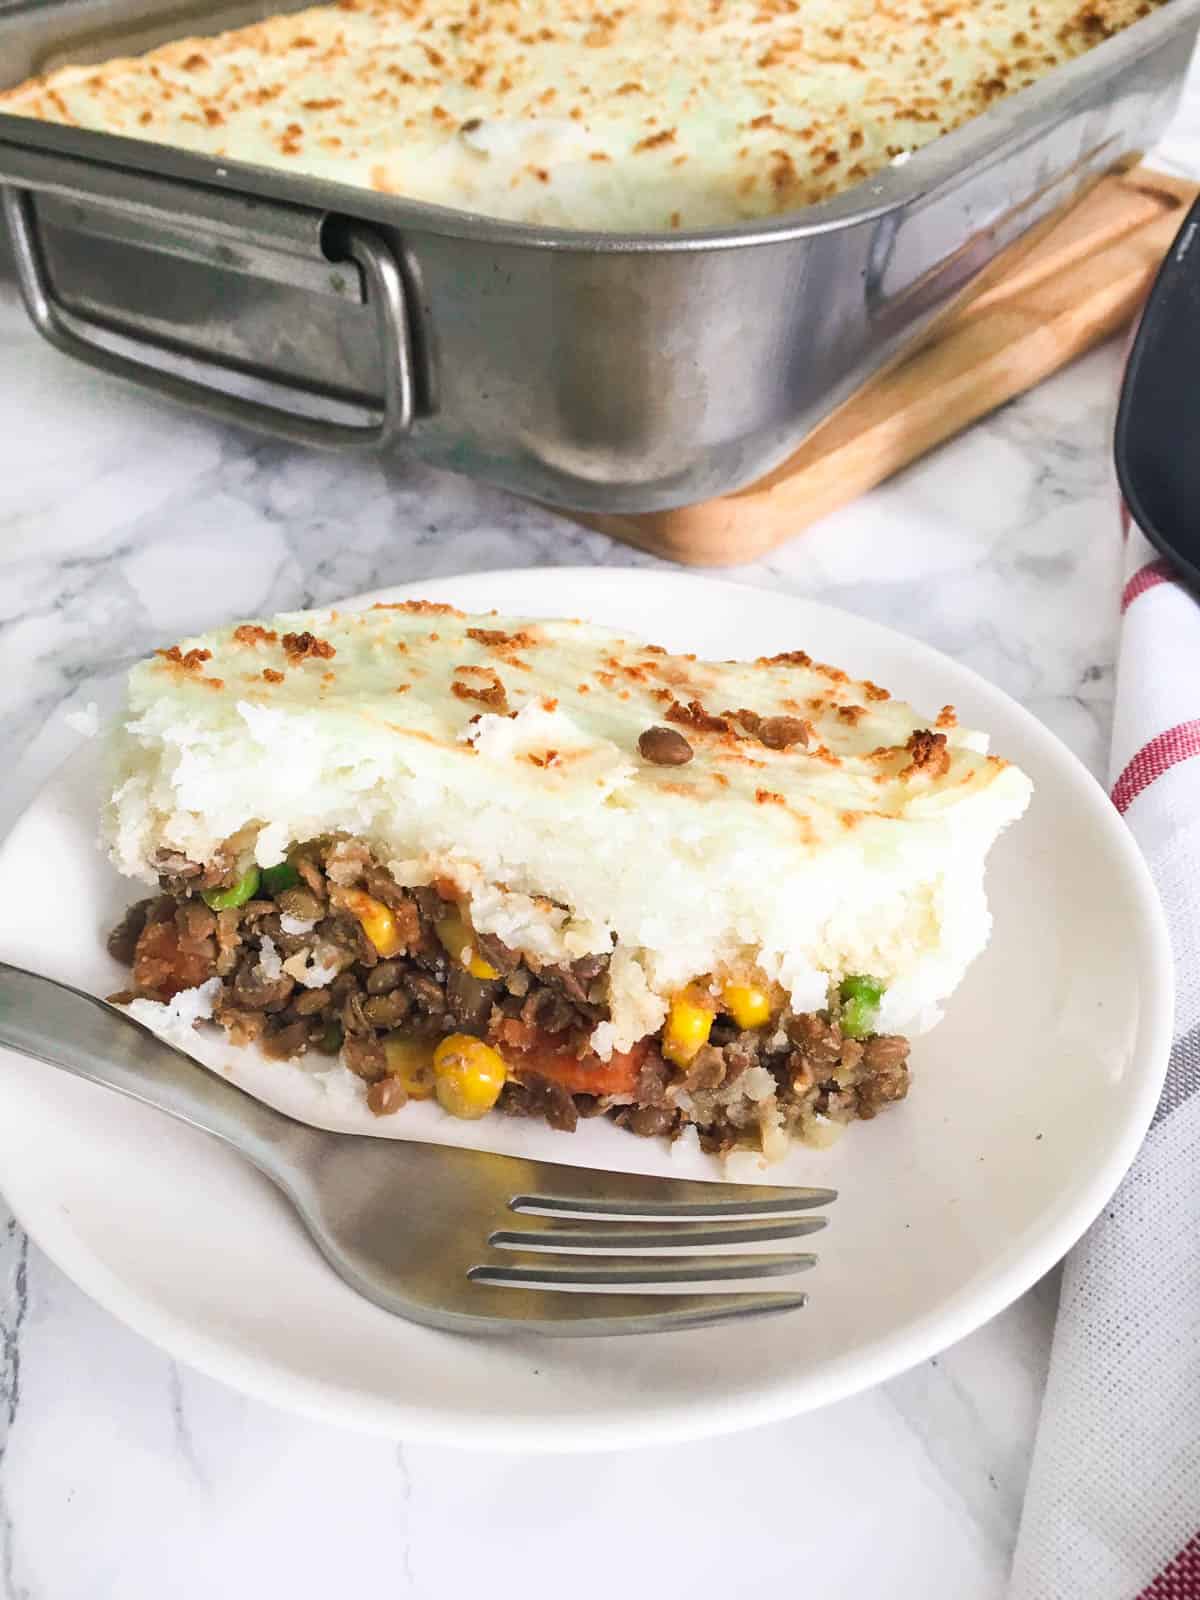 Slice of shepherd's pie in white plate with remaining tray of pie in the background.